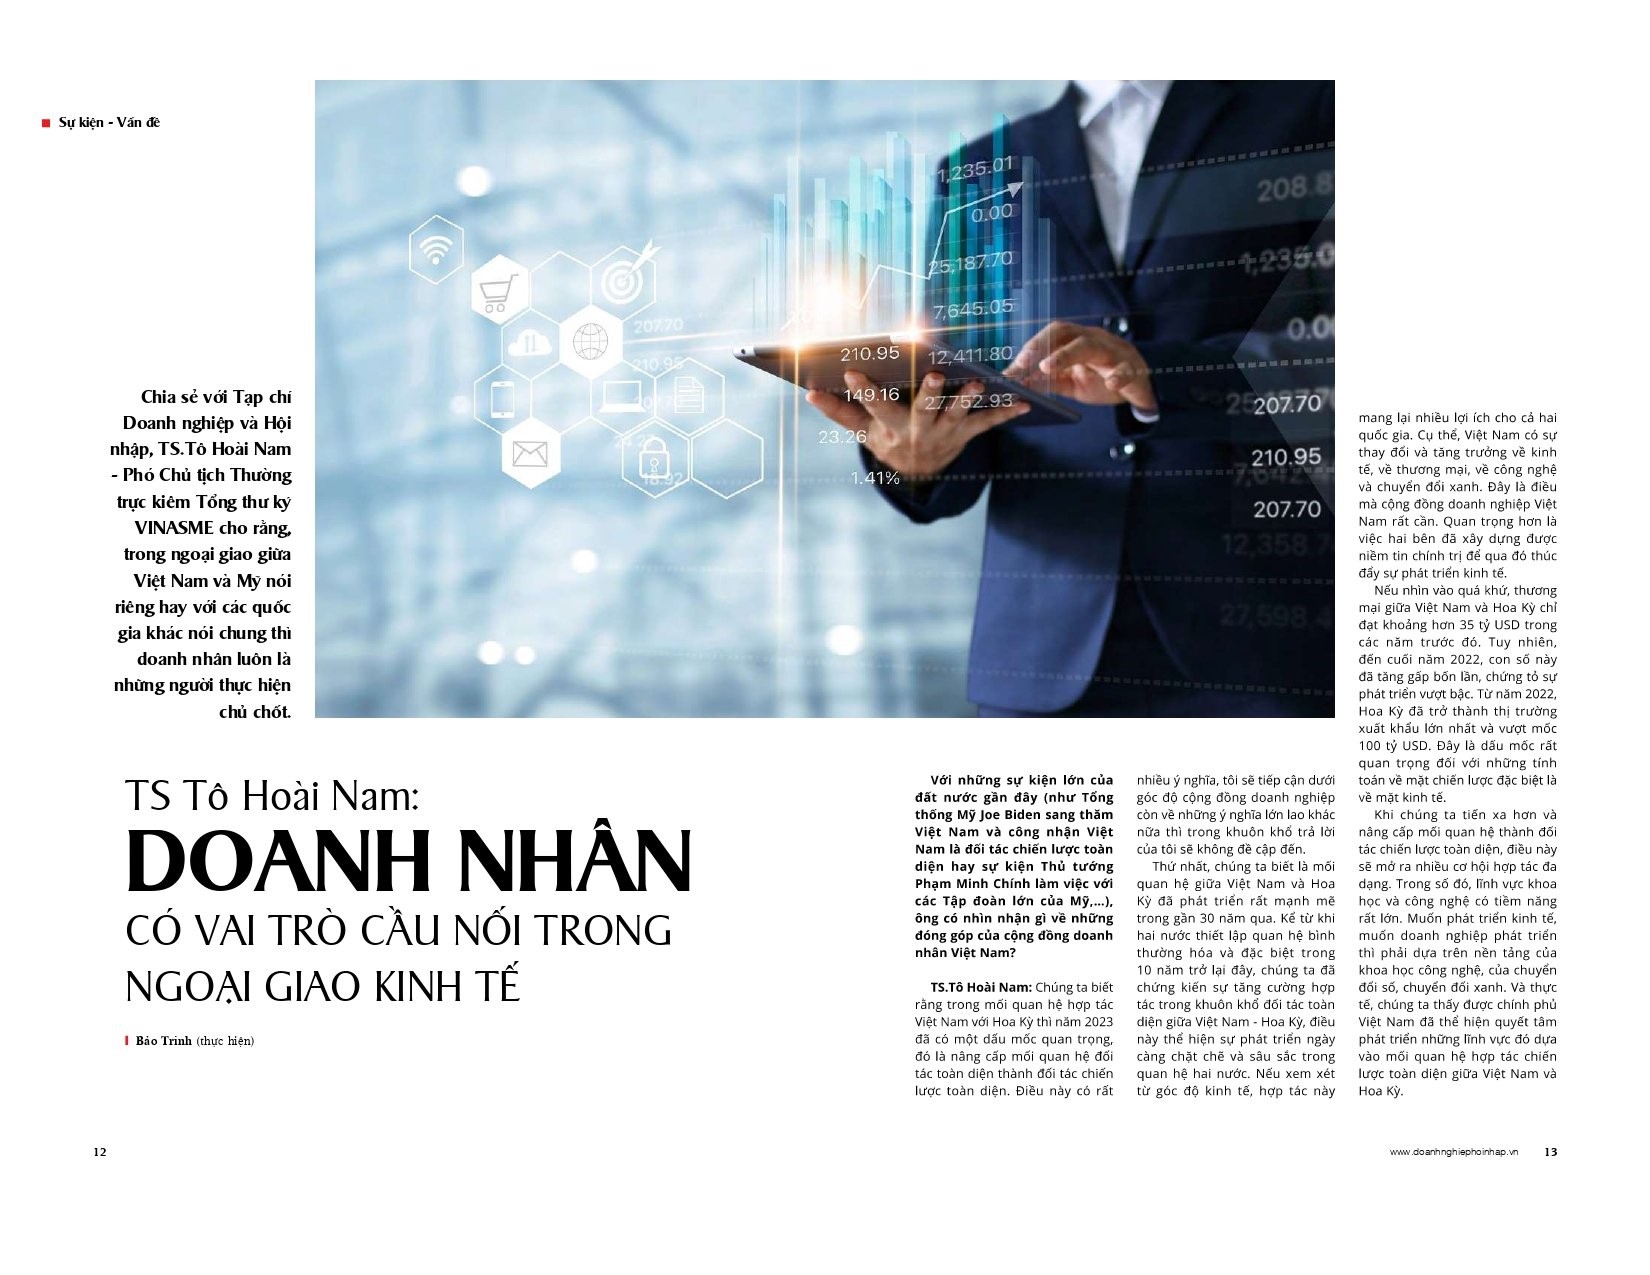 Sharing with Business and Integration Magazine, Dr. To Hoai Nam - Permanent Vice President and Secretary General of VINASME said that in diplomacy between Vietnam and the US in particular or with other countries in general, business Employees are always the key implementers.